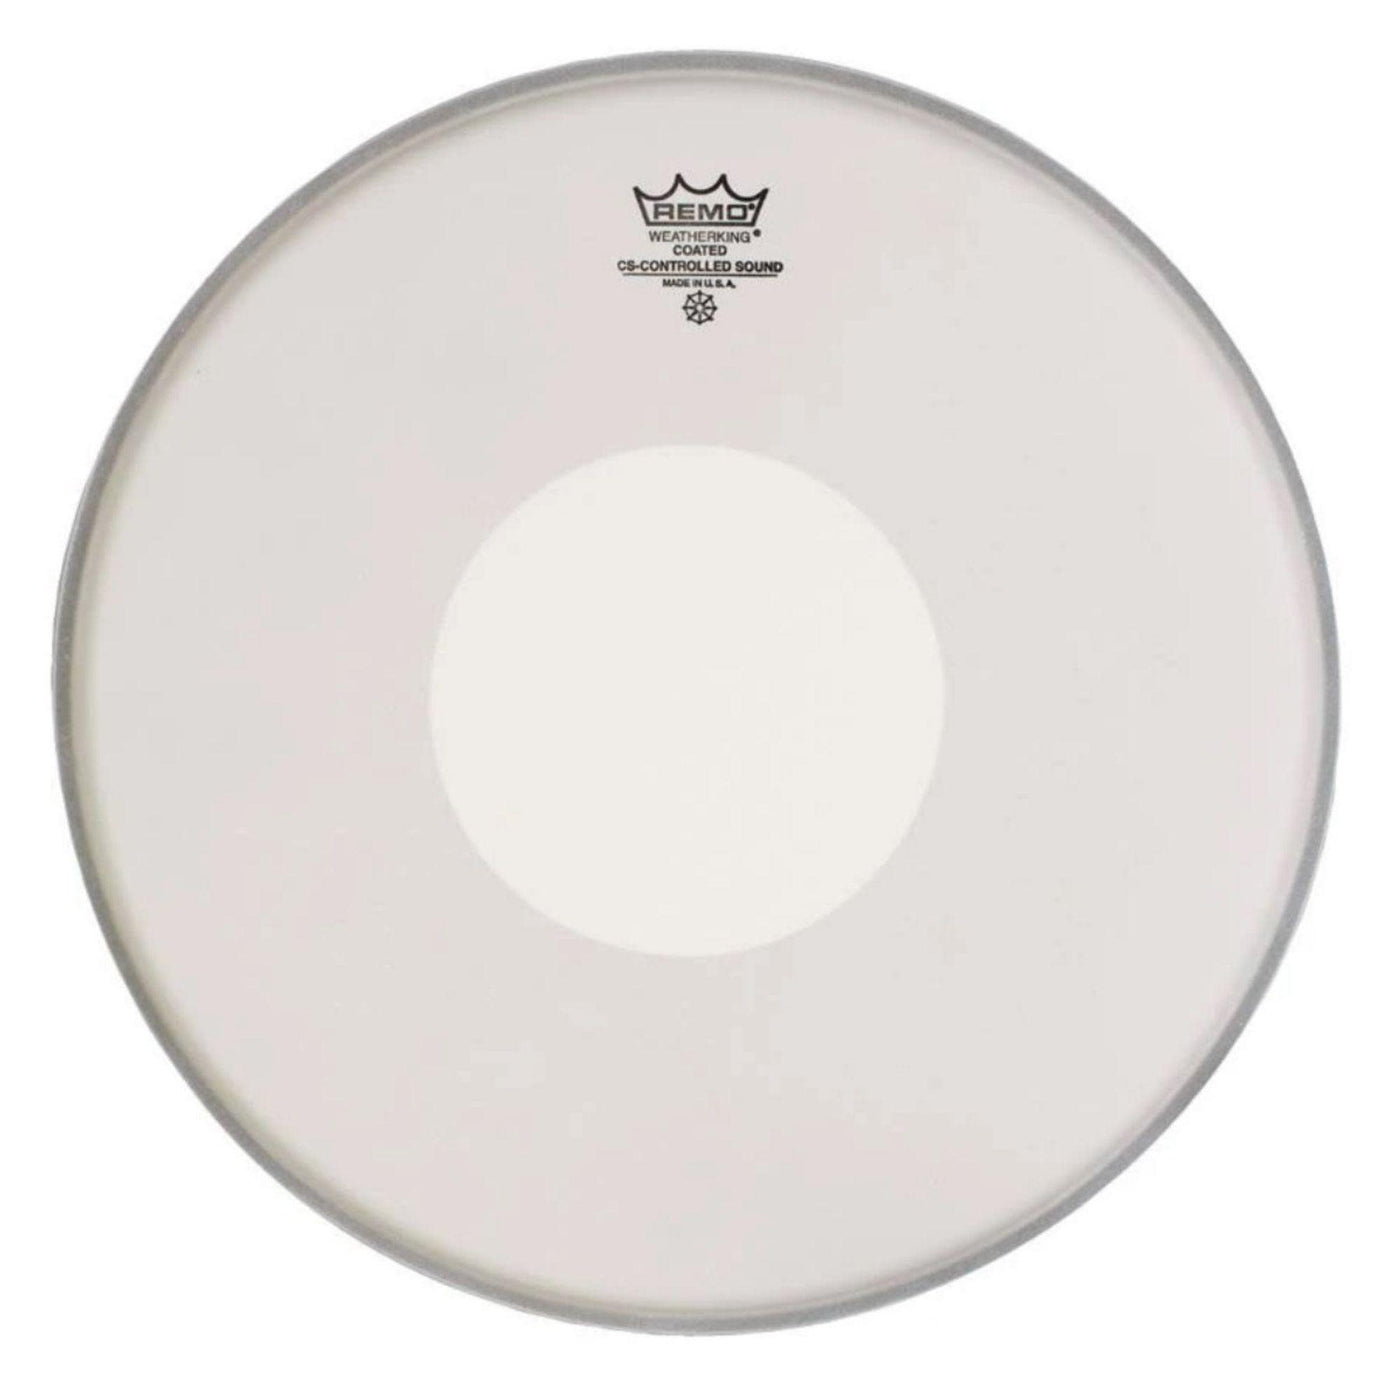 Remo CS-0114-00 14" Controlled Sound Coated Drum Head with White Dot